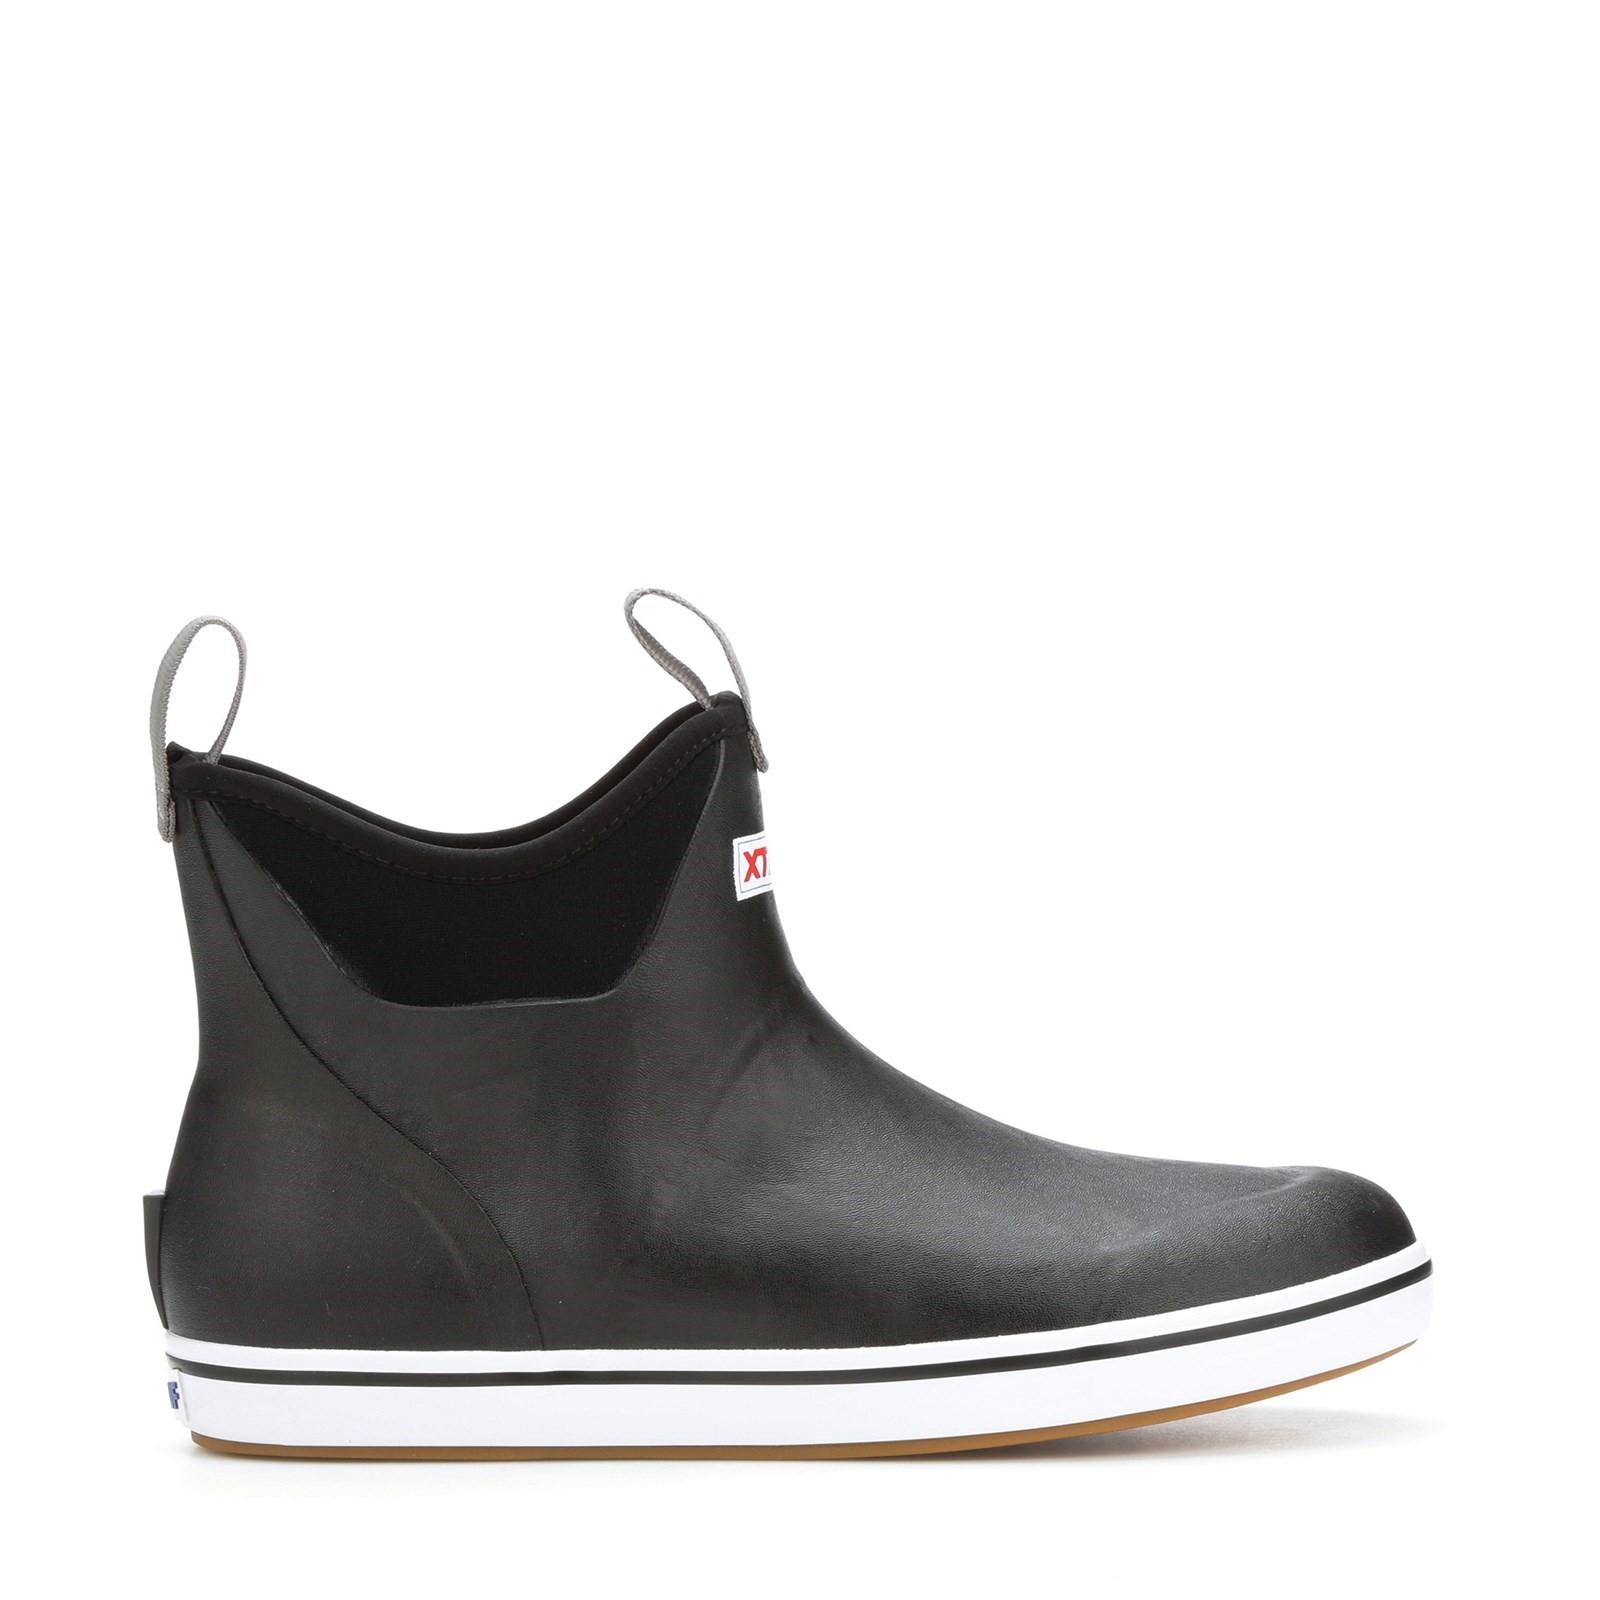 Xtratuf Ankle Deck Boot